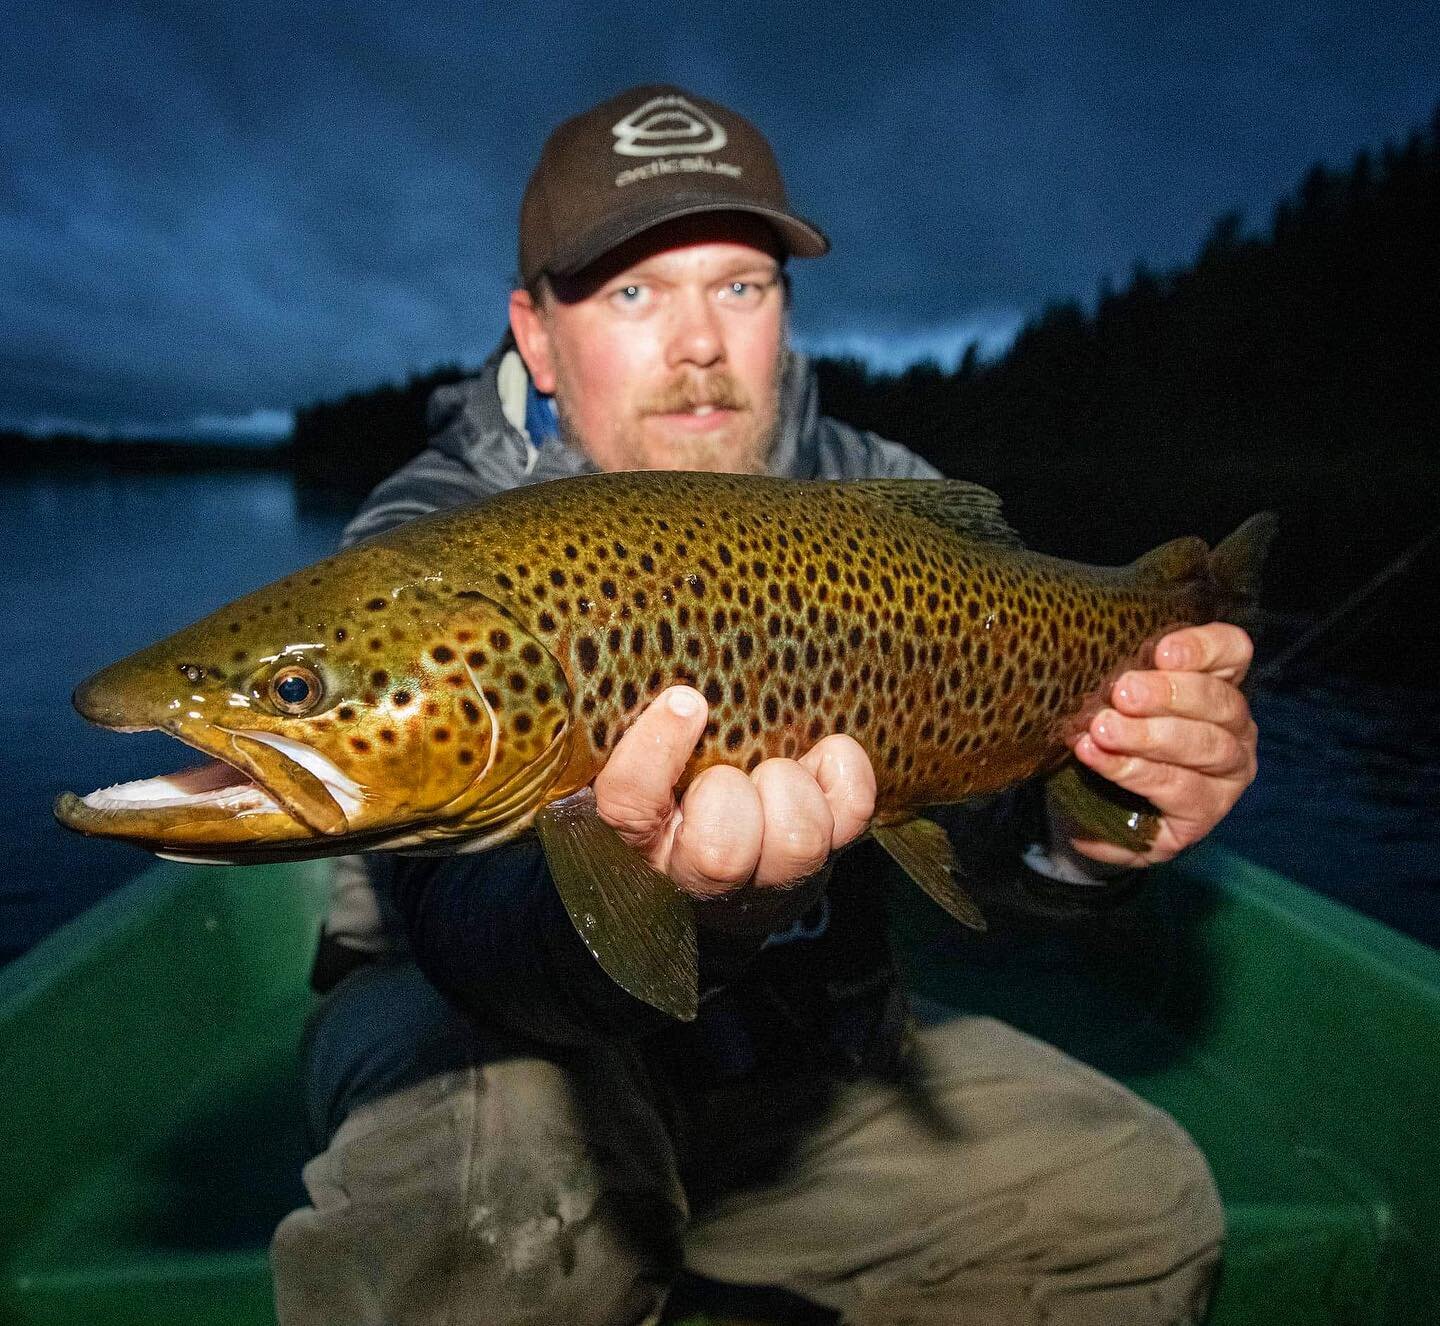 Martin with a heavy hitter. @flyfishmartin For guided trips or to book apartments at the Fishcamp email johnbond.mt@gmail.com #flyfishing #fluefiske #norway #utno #fishing #nature #renafishcamp #renafiskecamp